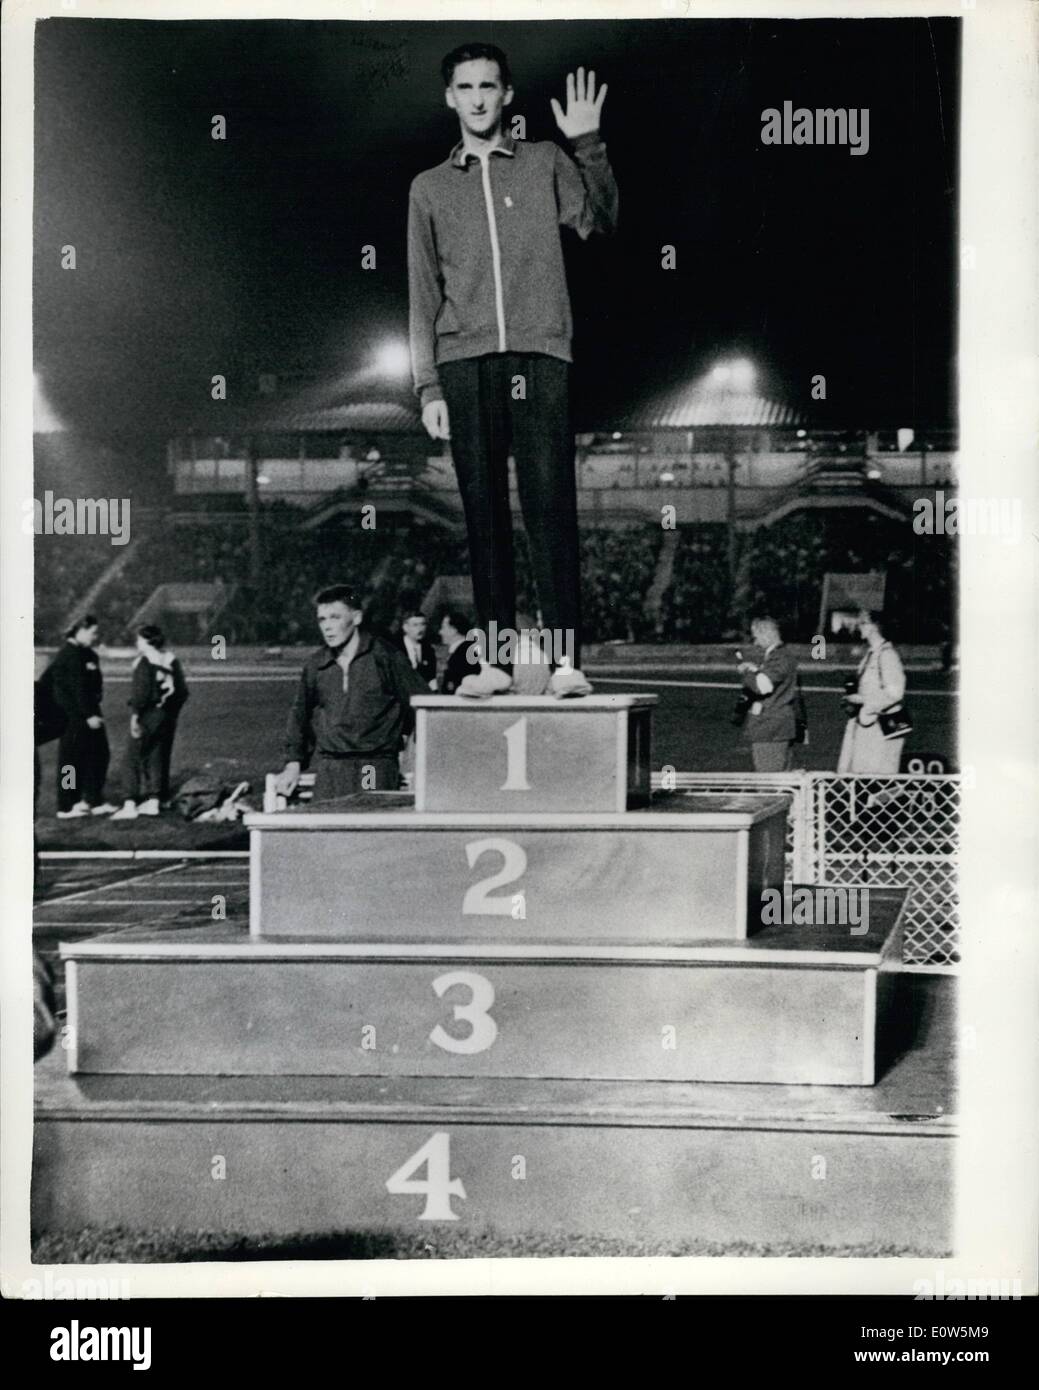 Sep. 09, 1961 - Gordon Pirie finished his career as an amateur runner by winning the 5,000 Metres at White City: Gordon Pirie, the stormy star of British athletics, said goodbye to the amateur running track last night with great triumph when he won the 5,000 metres in the England versus Russia match at the White City. He was given a huge reception by the 20,000 crowd after his great win. Photo shows from the place of honour Gordon Pirie Waves to the crowd. A crowd who have loved him through 12 turbulent years, having broken five world records and run for England in 30 countries Stock Photo